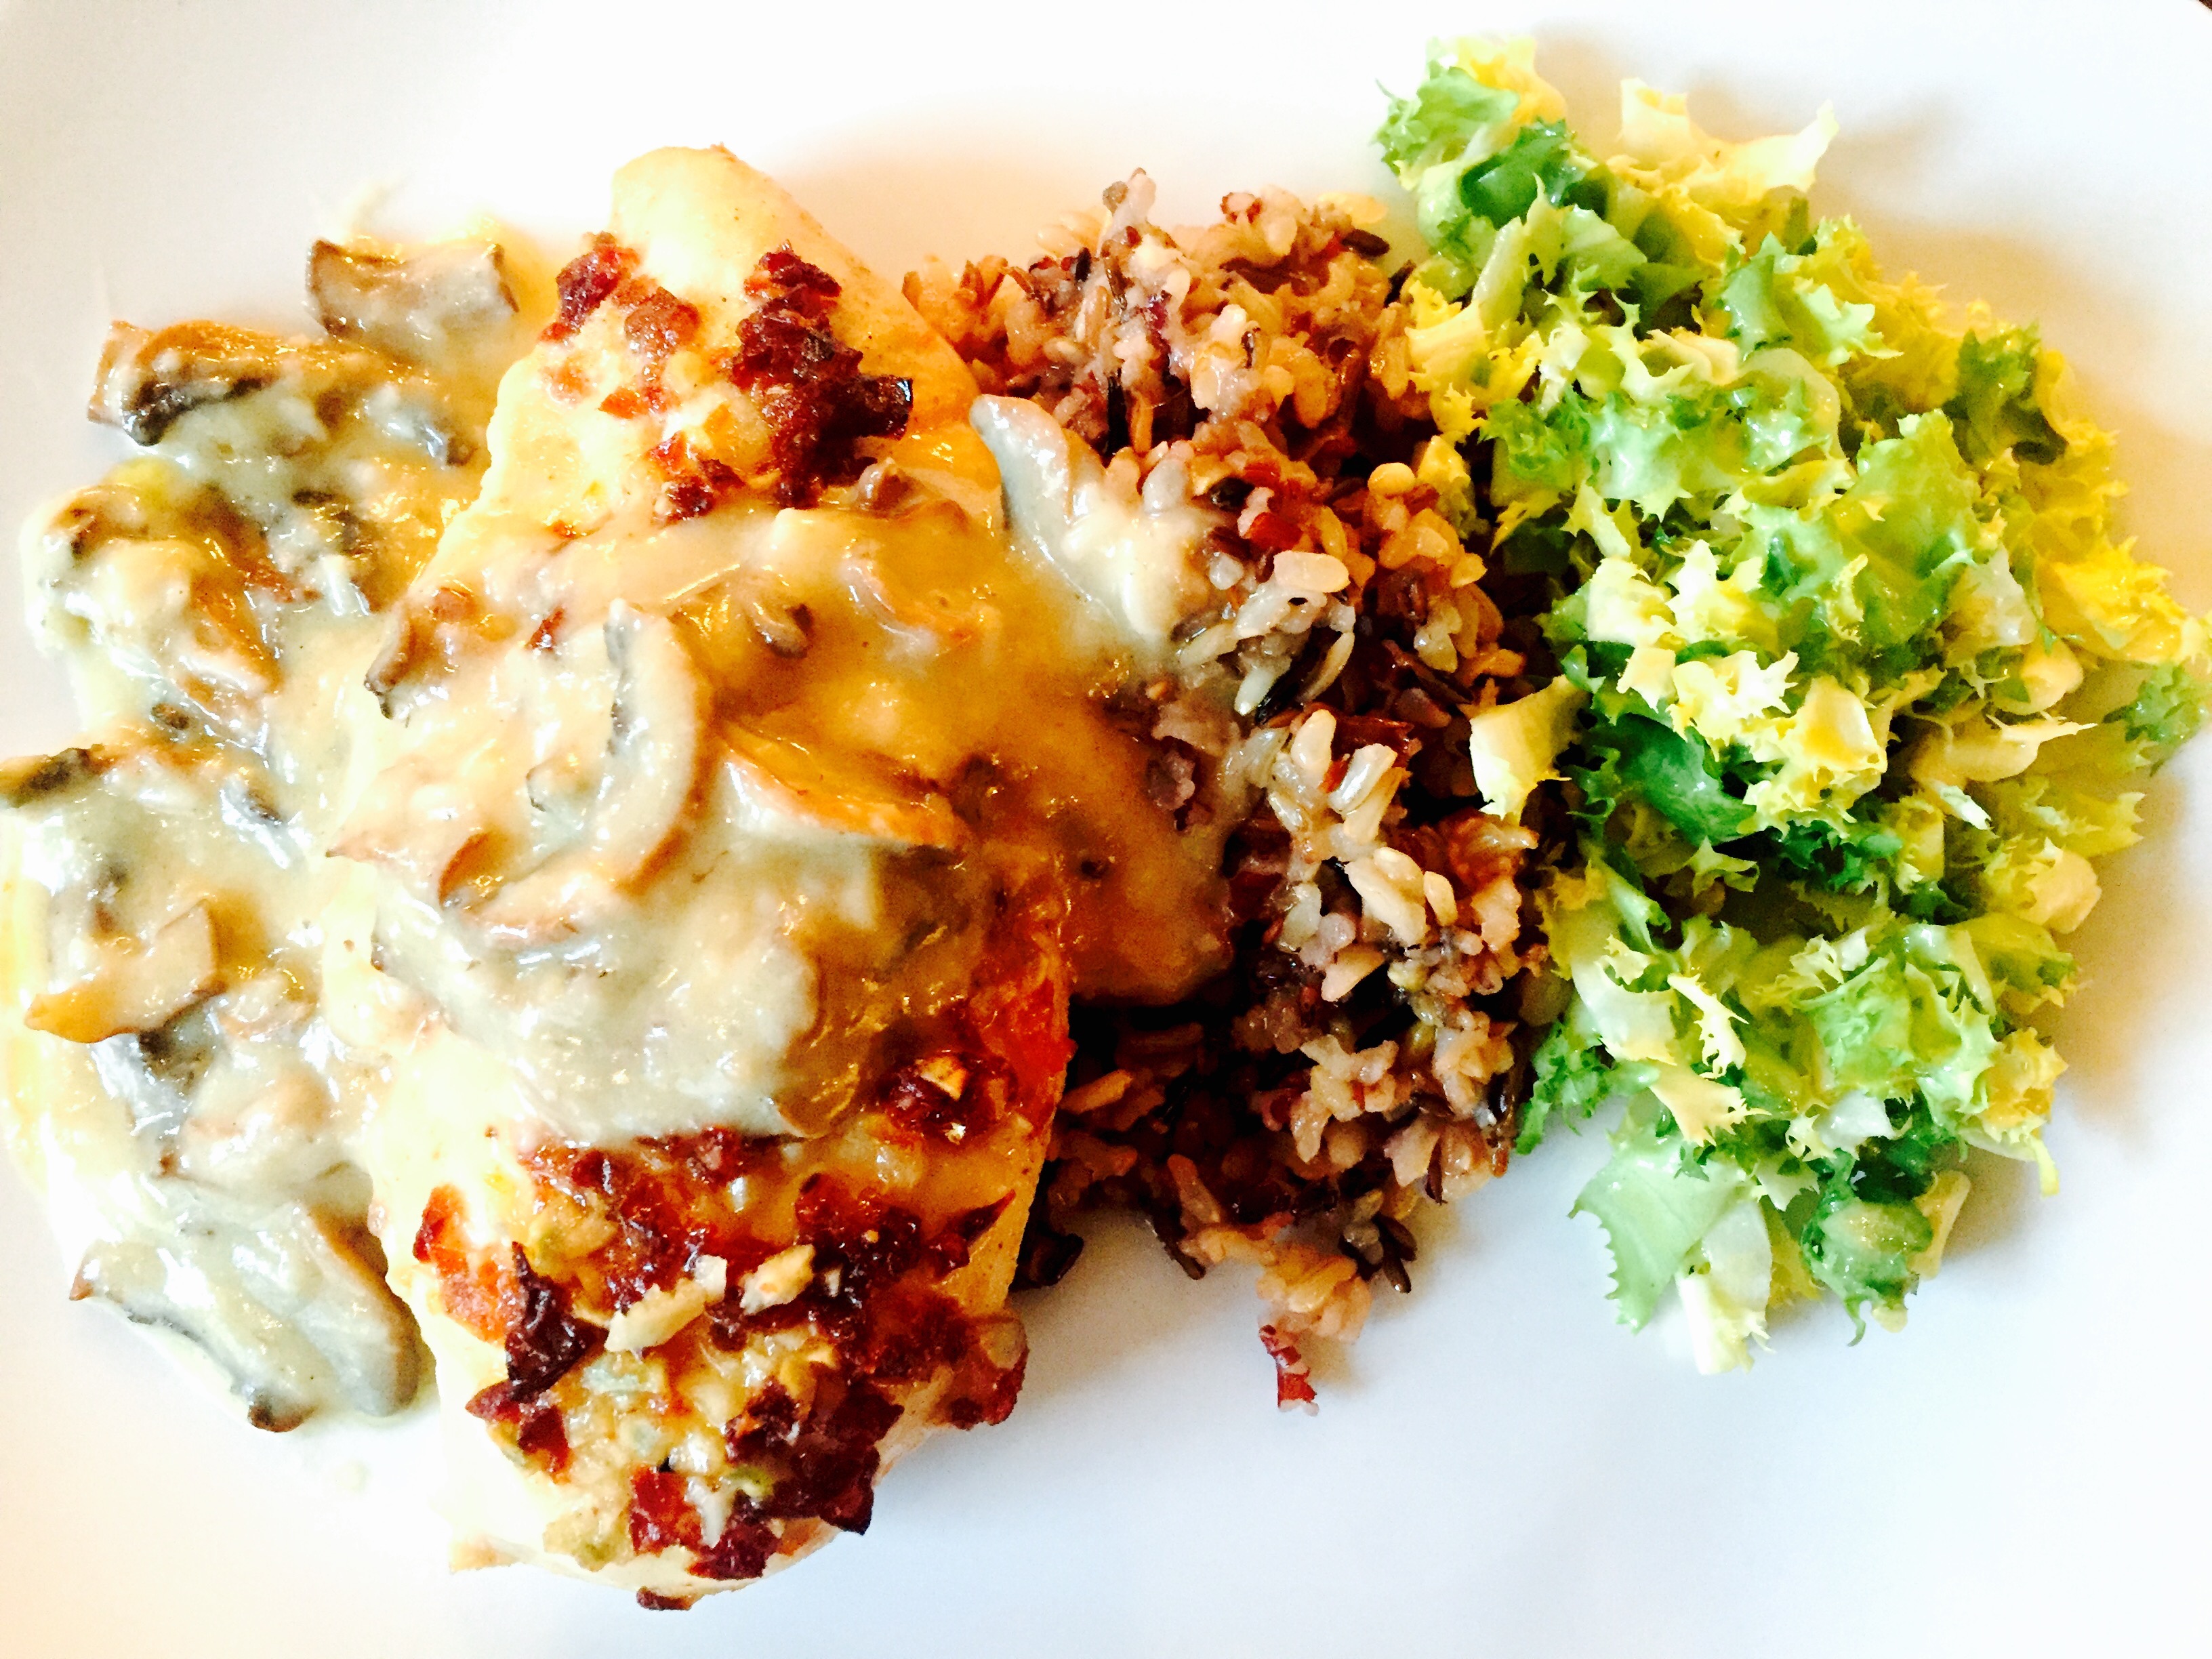 Roasted chicken breast in creamy mushroom sauce with wild rice and frisée salad